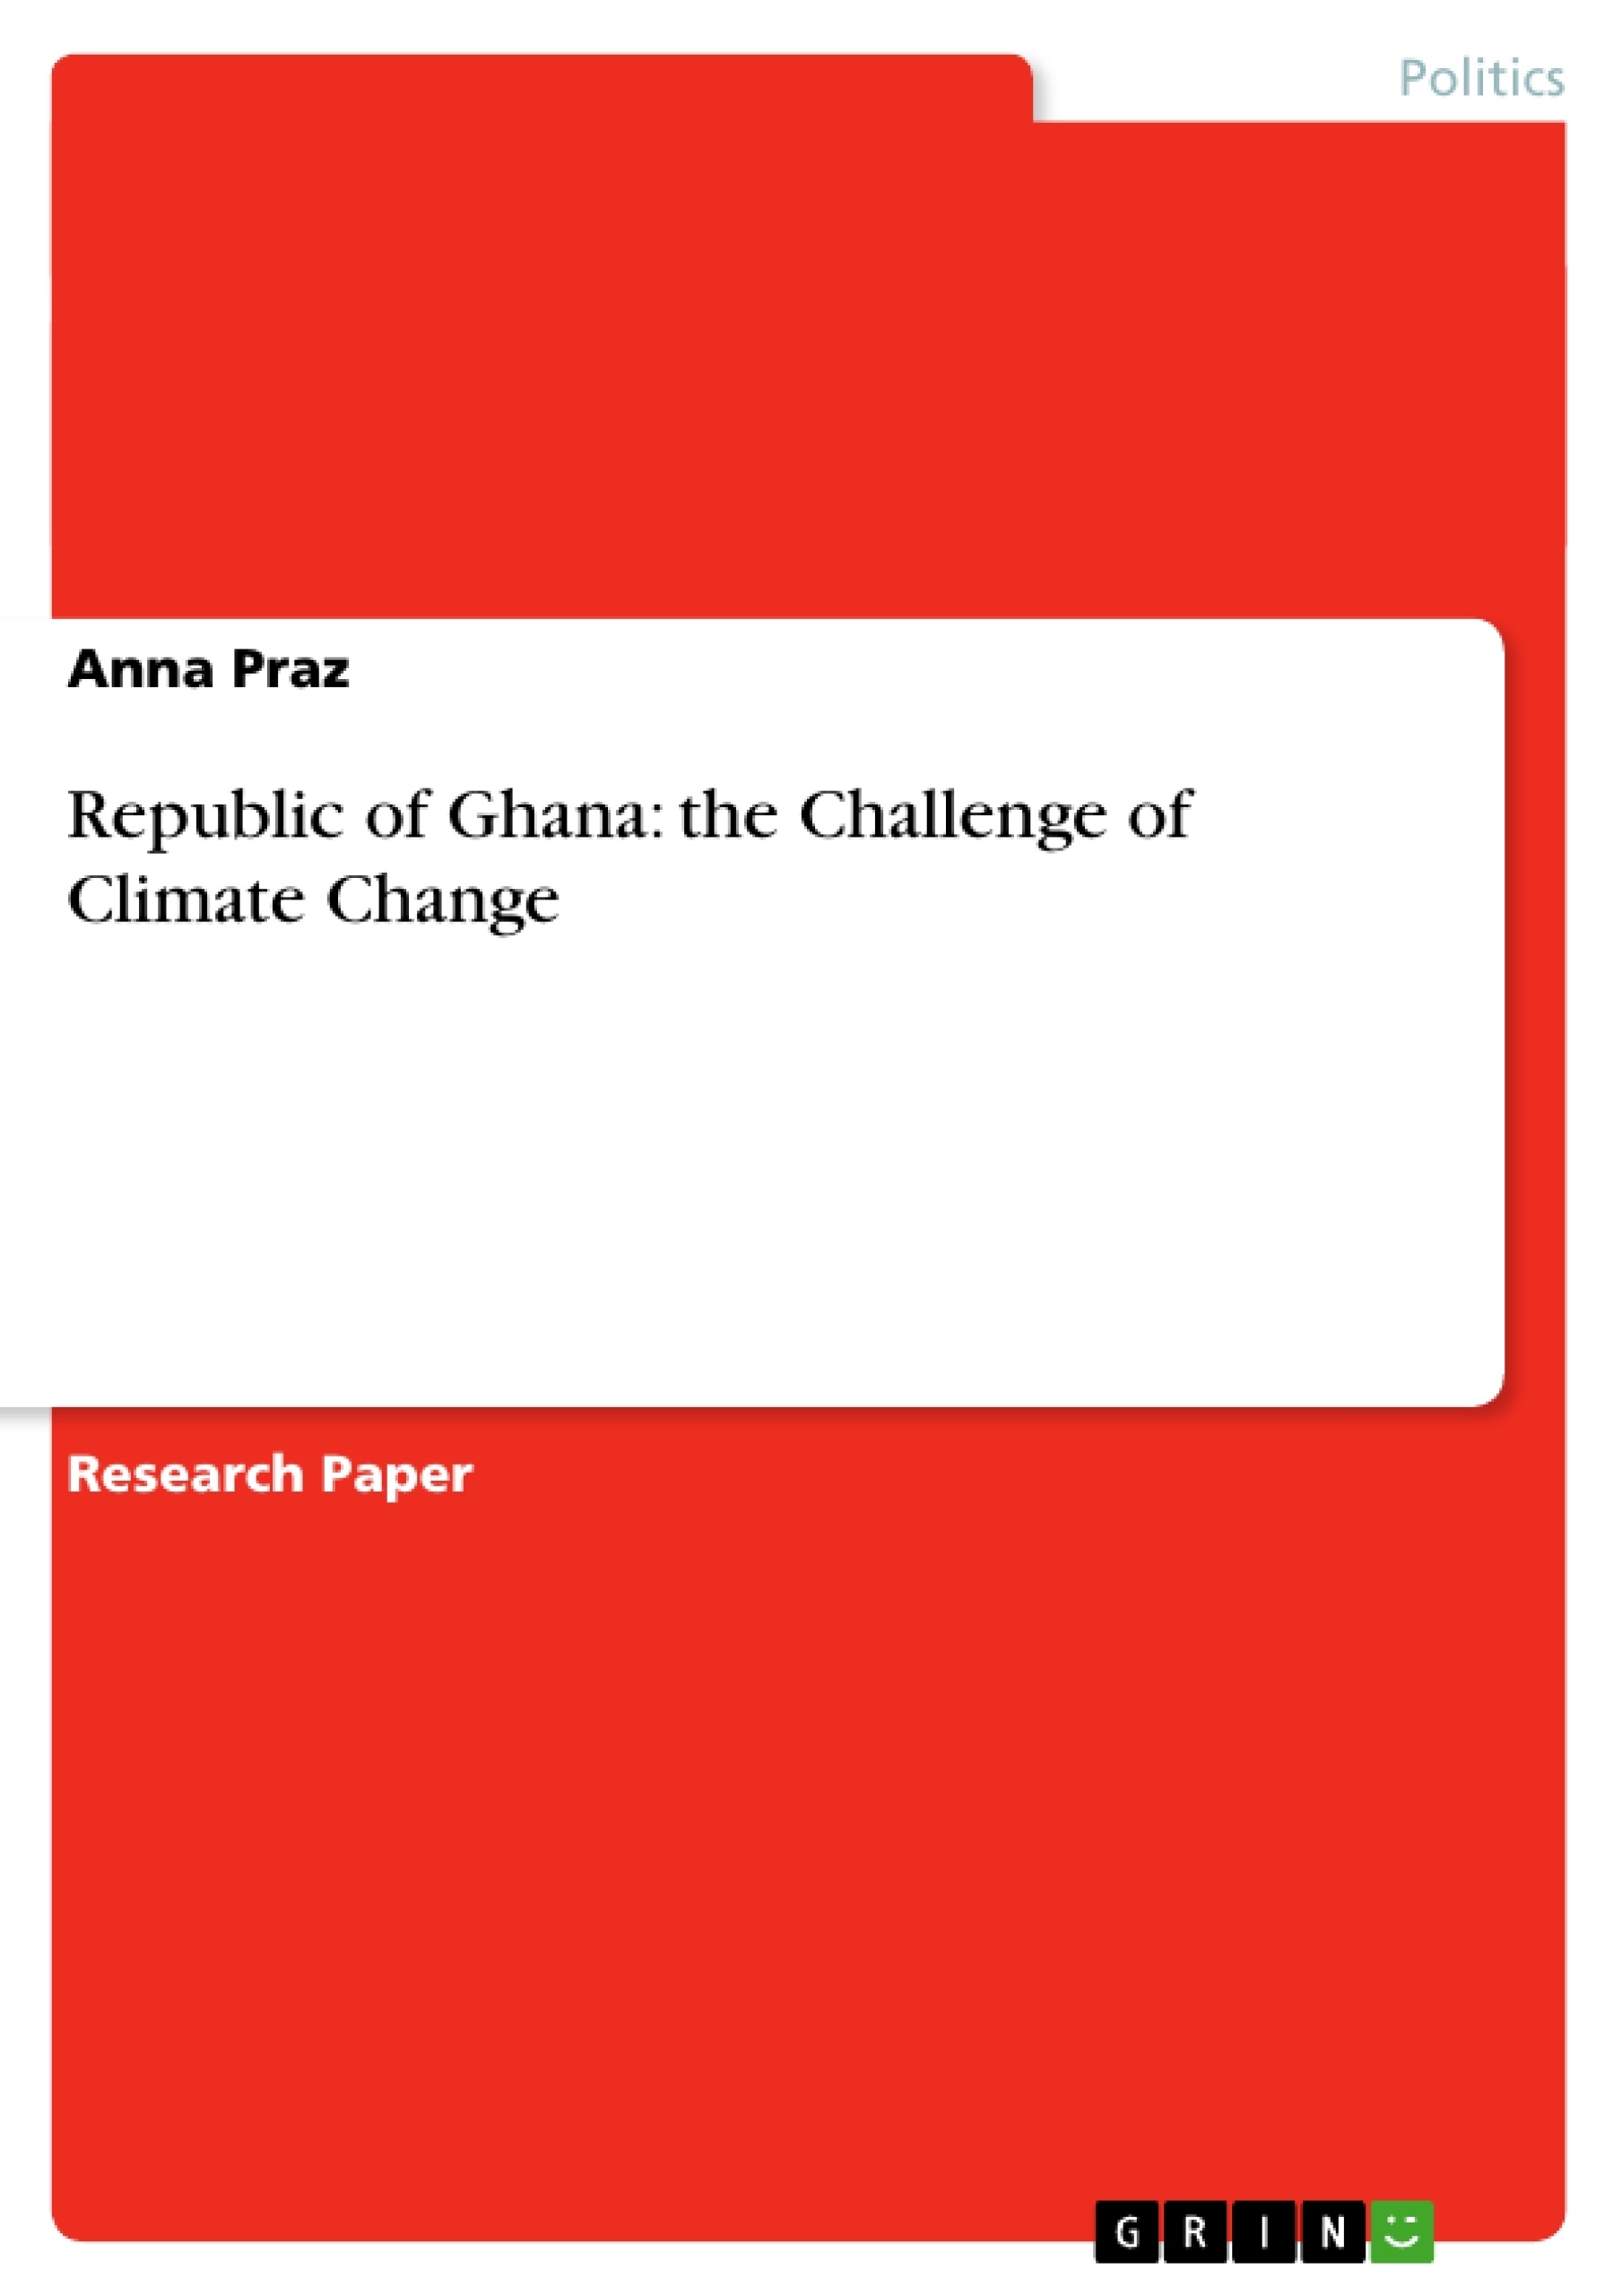 Title: Republic of Ghana: the Challenge of Climate Change